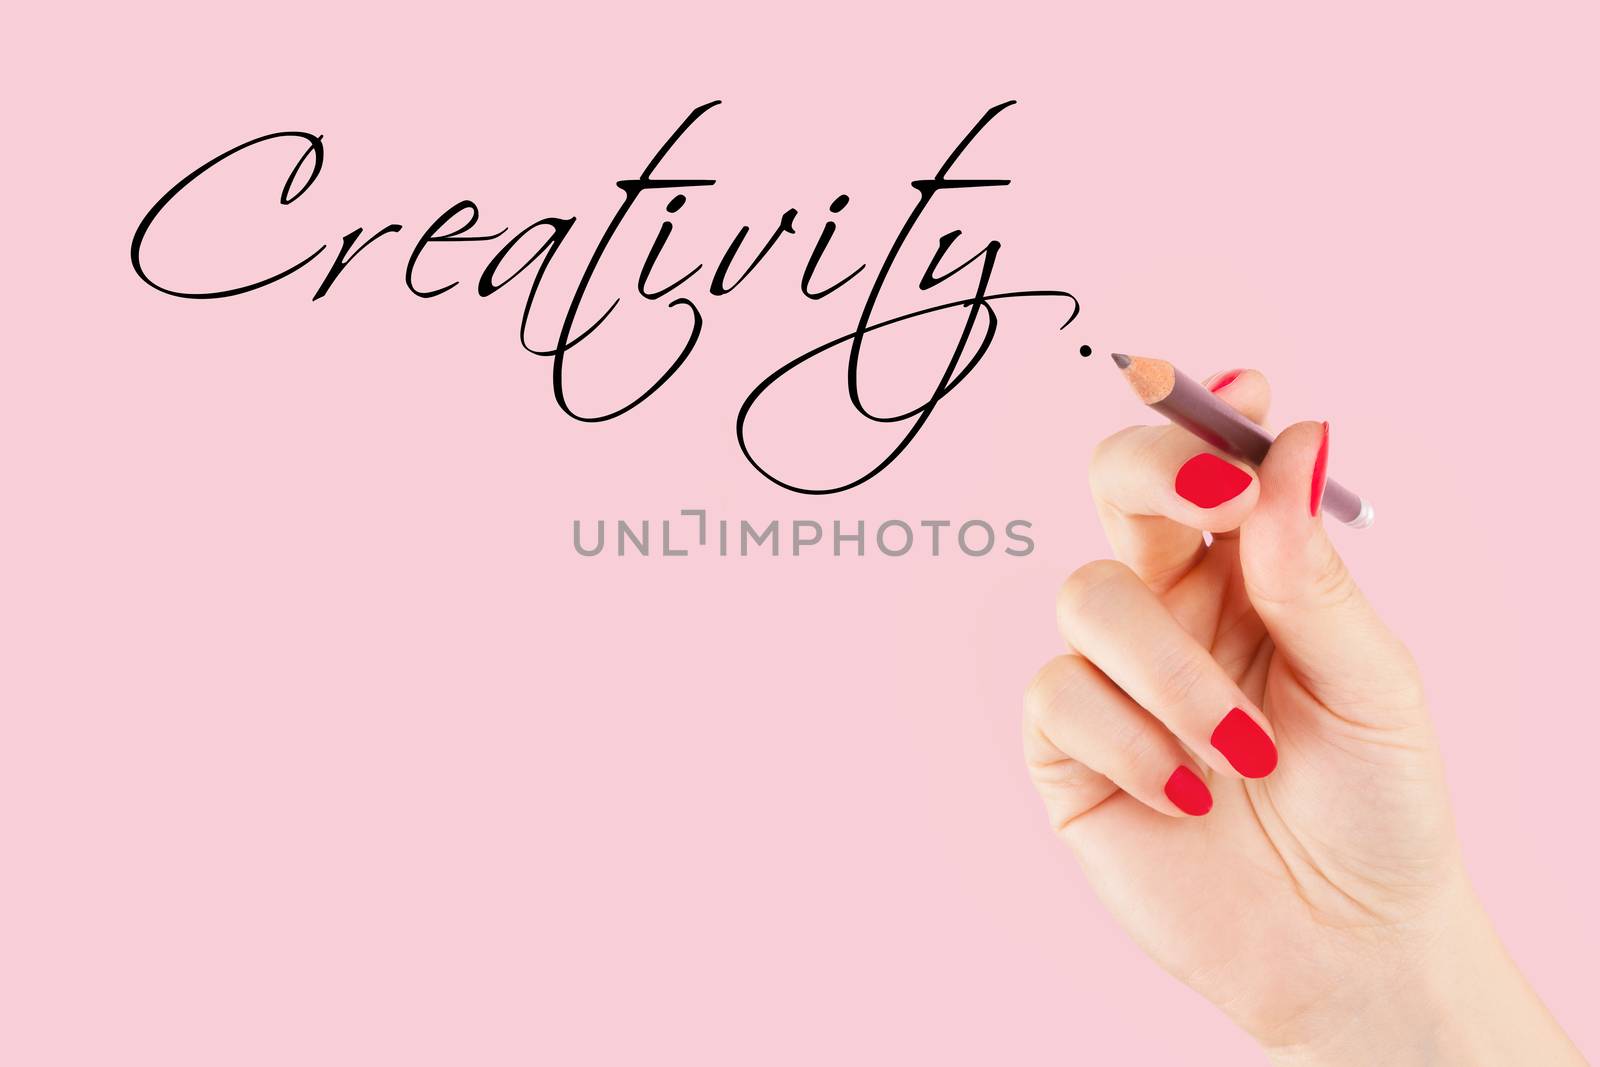 Creative industries. Female hand with pencil writing the word creativity in caligraphy.